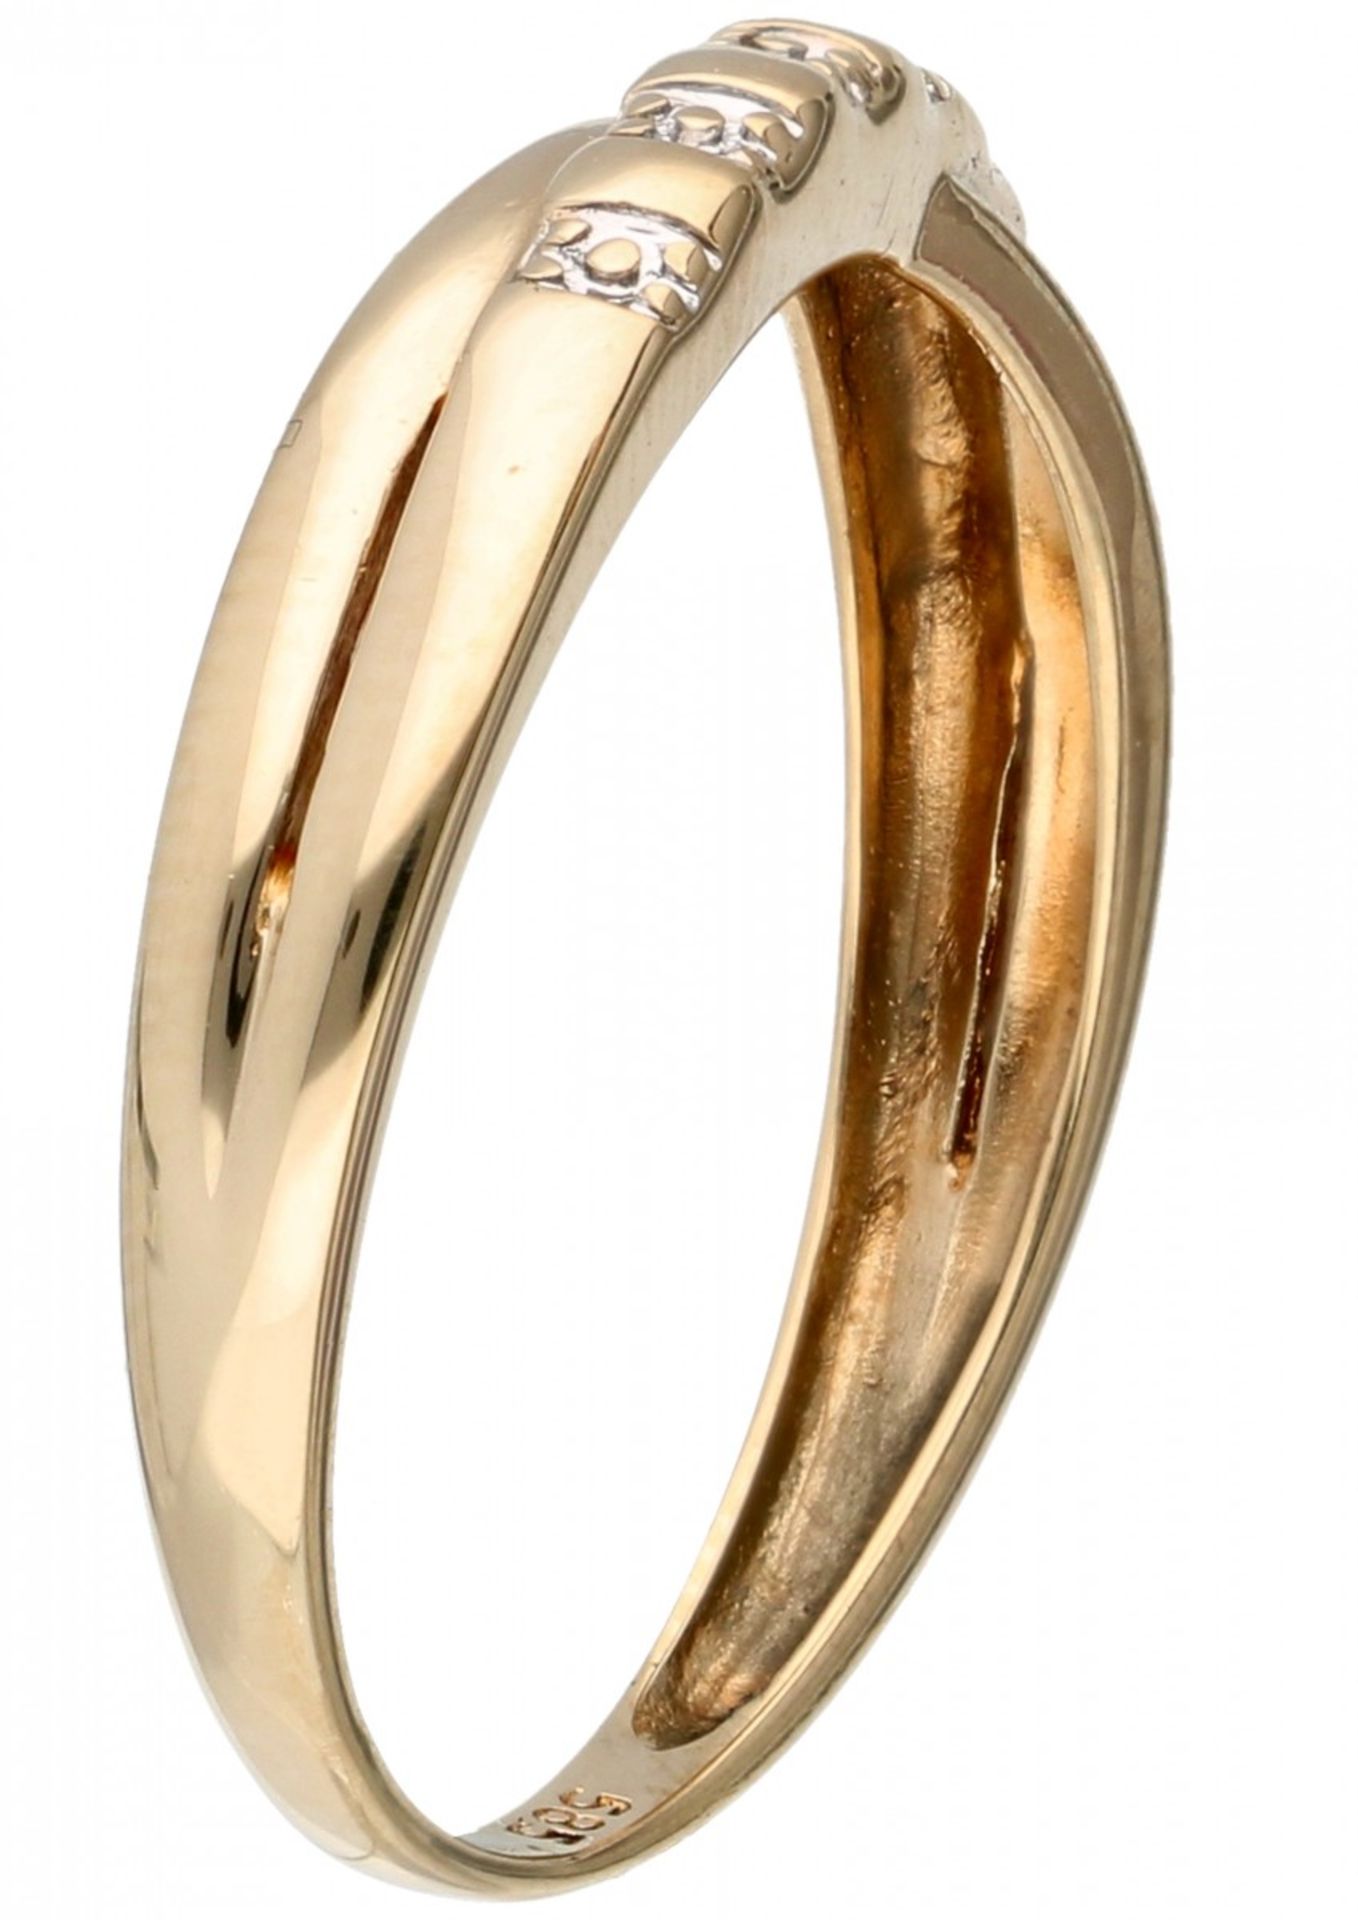 Yellow gold criss cross ring set with a diamond - 14 ct. - Image 2 of 2